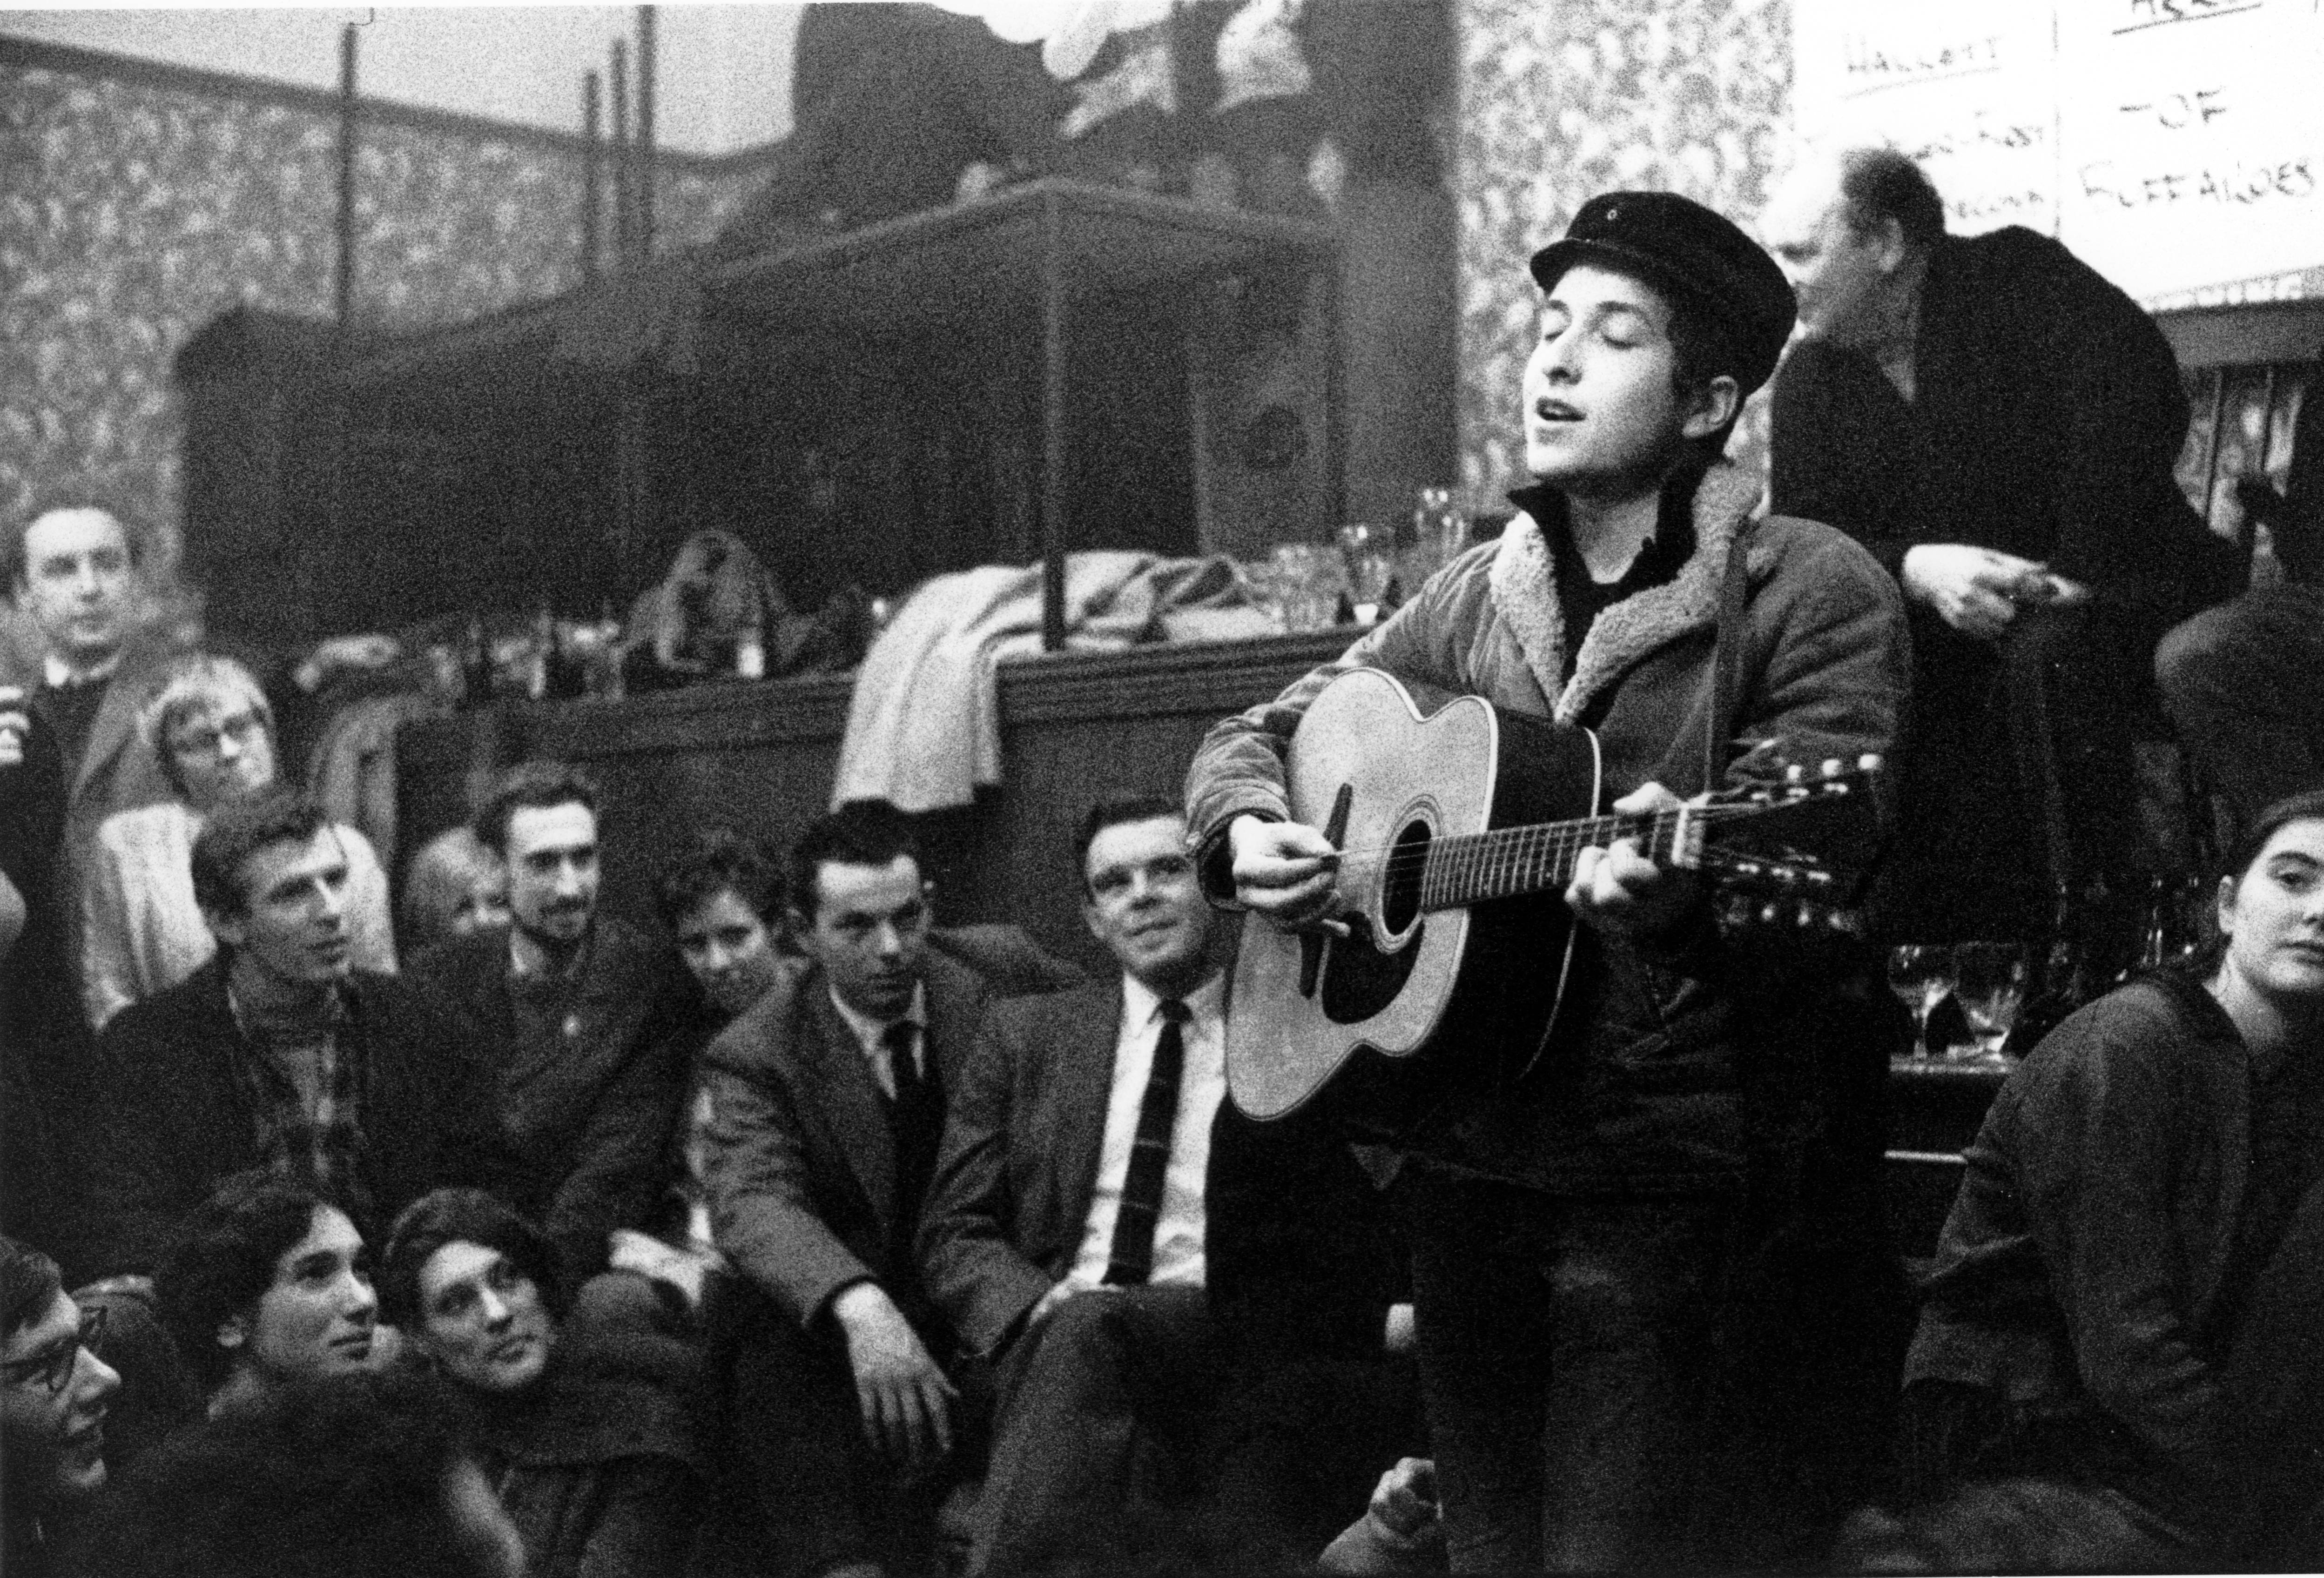 Bob Dylan performing live onstage at the Singers Club Christmas party on December 22, 1962 | Source: Getty Images